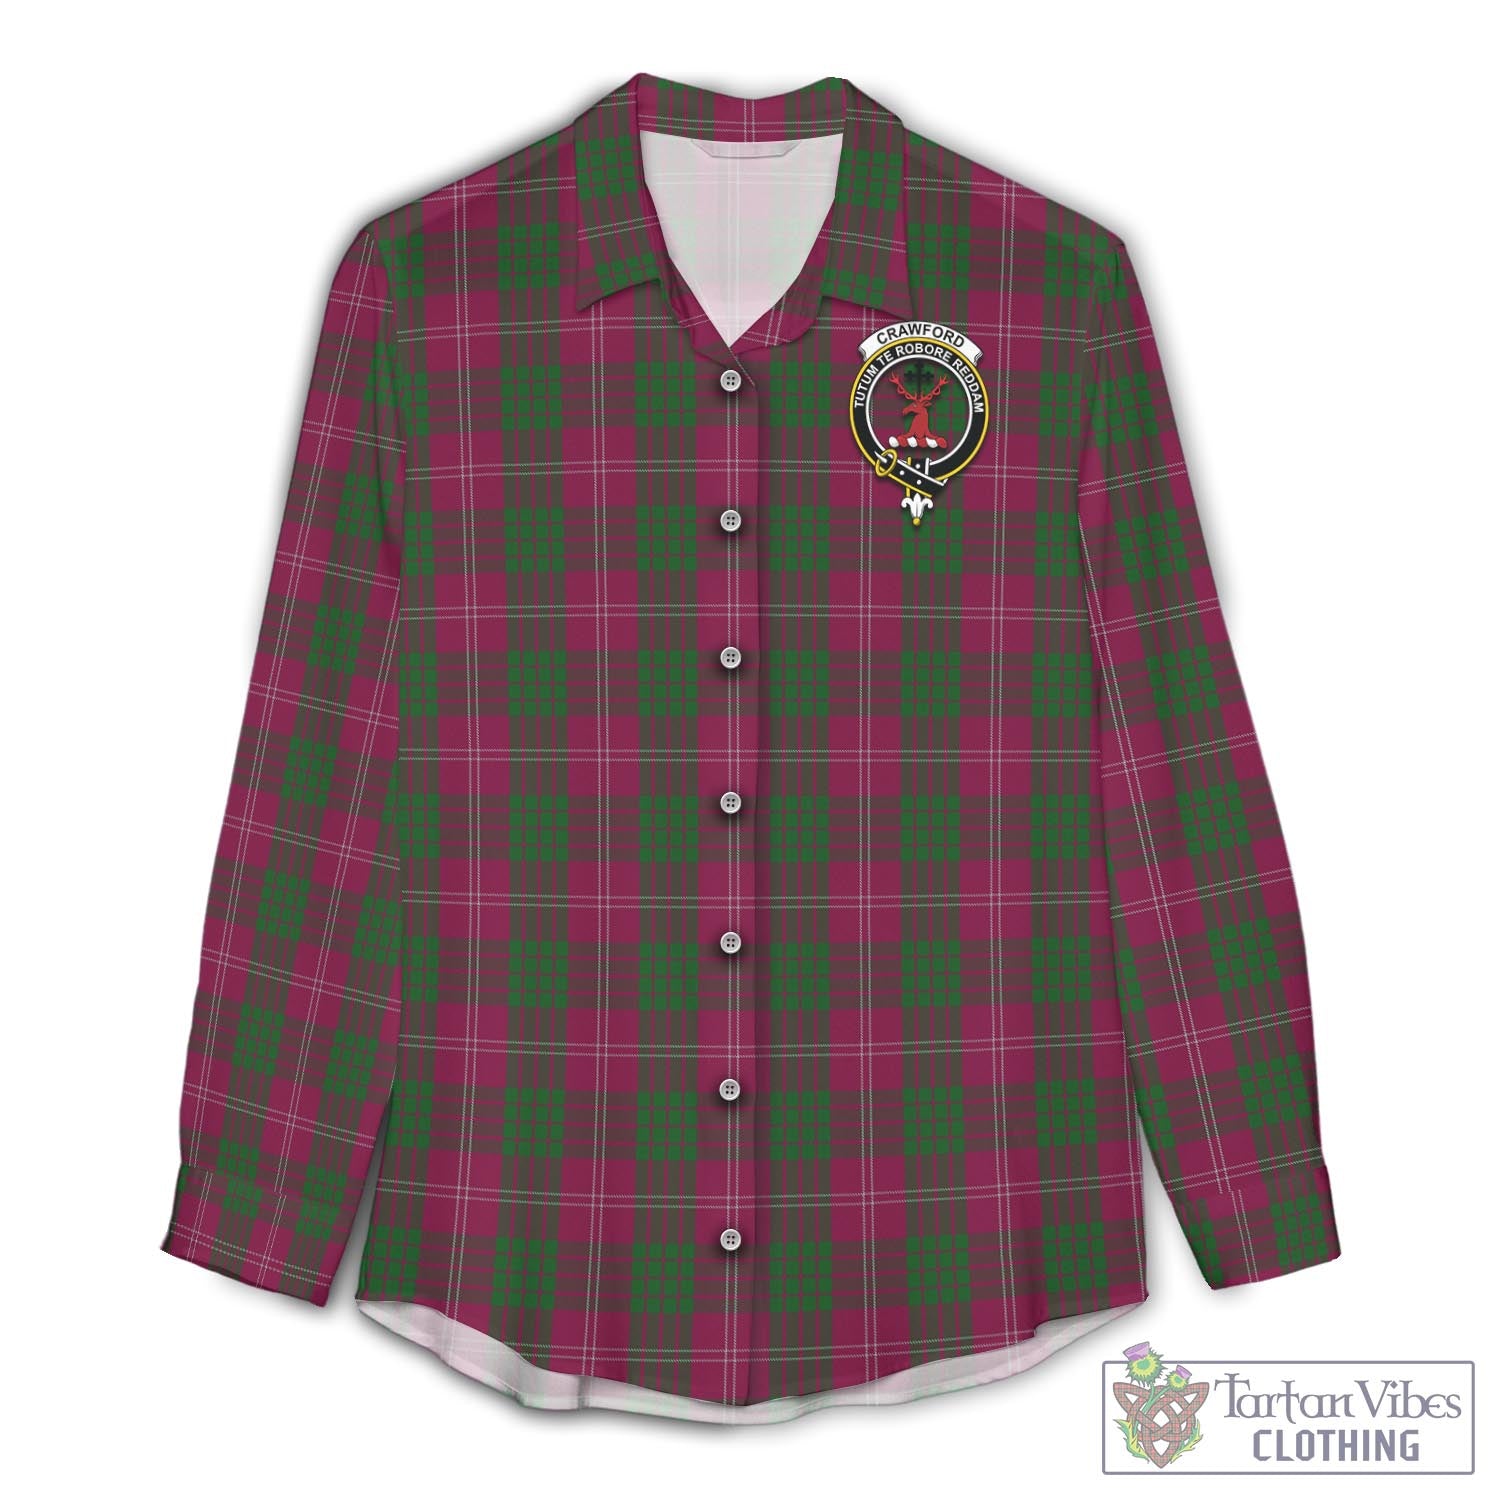 Tartan Vibes Clothing Crawford Tartan Womens Casual Shirt with Family Crest